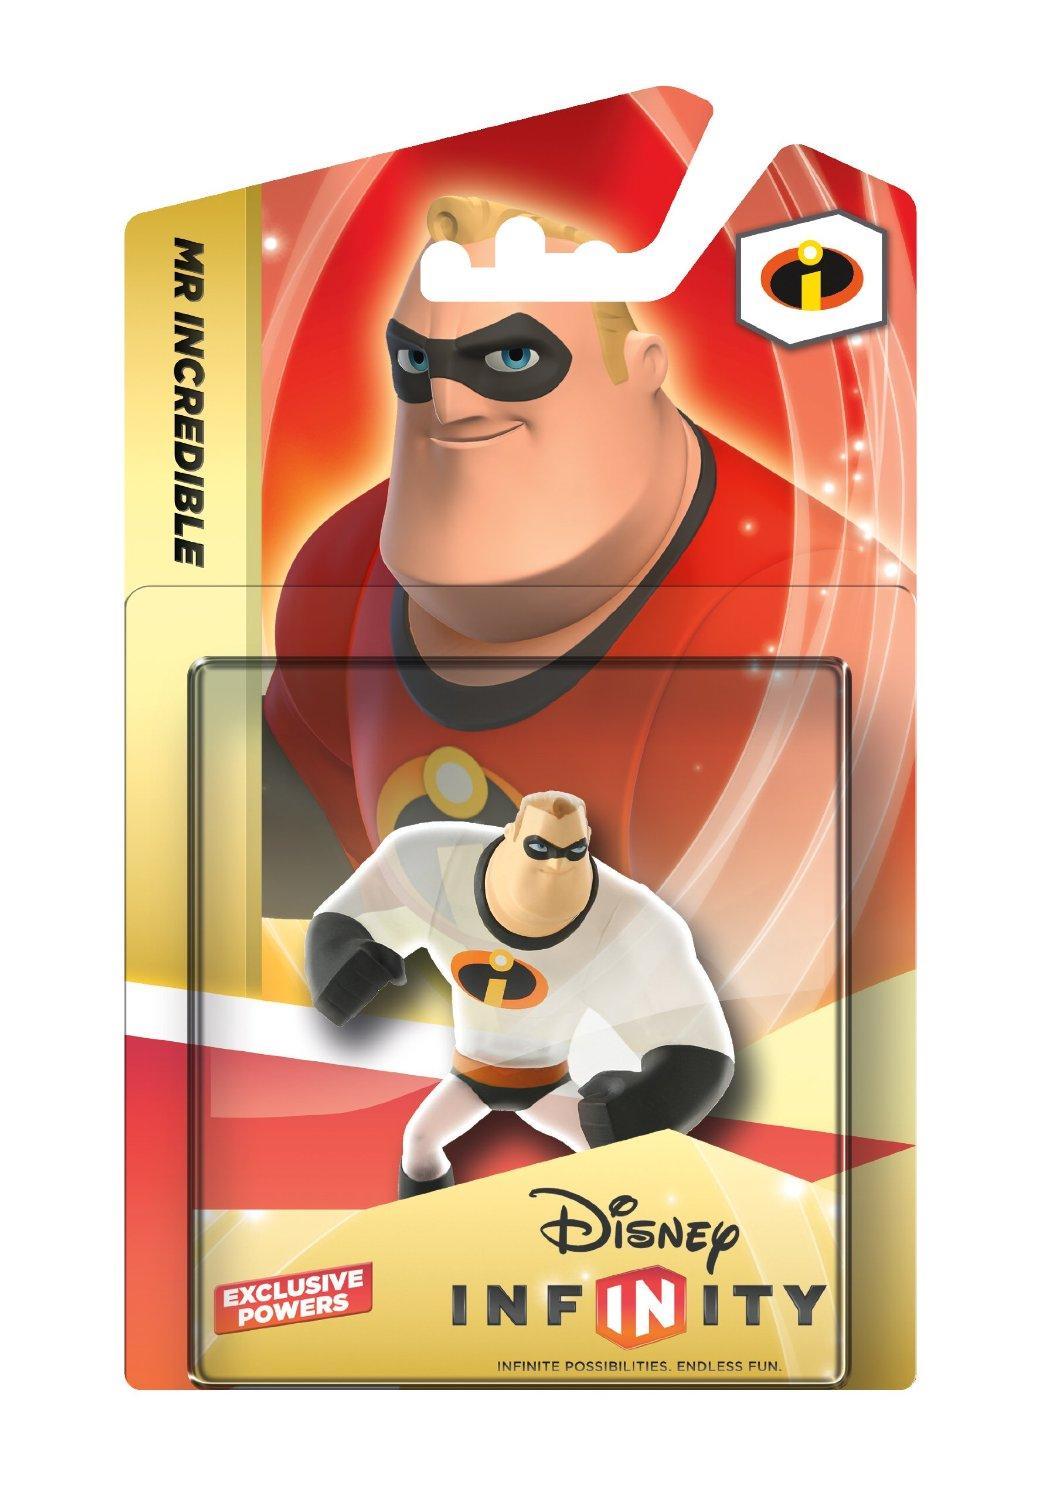 Mr Incredible Crystal Prices Disney Infinity Compare Loose Cib And New Prices